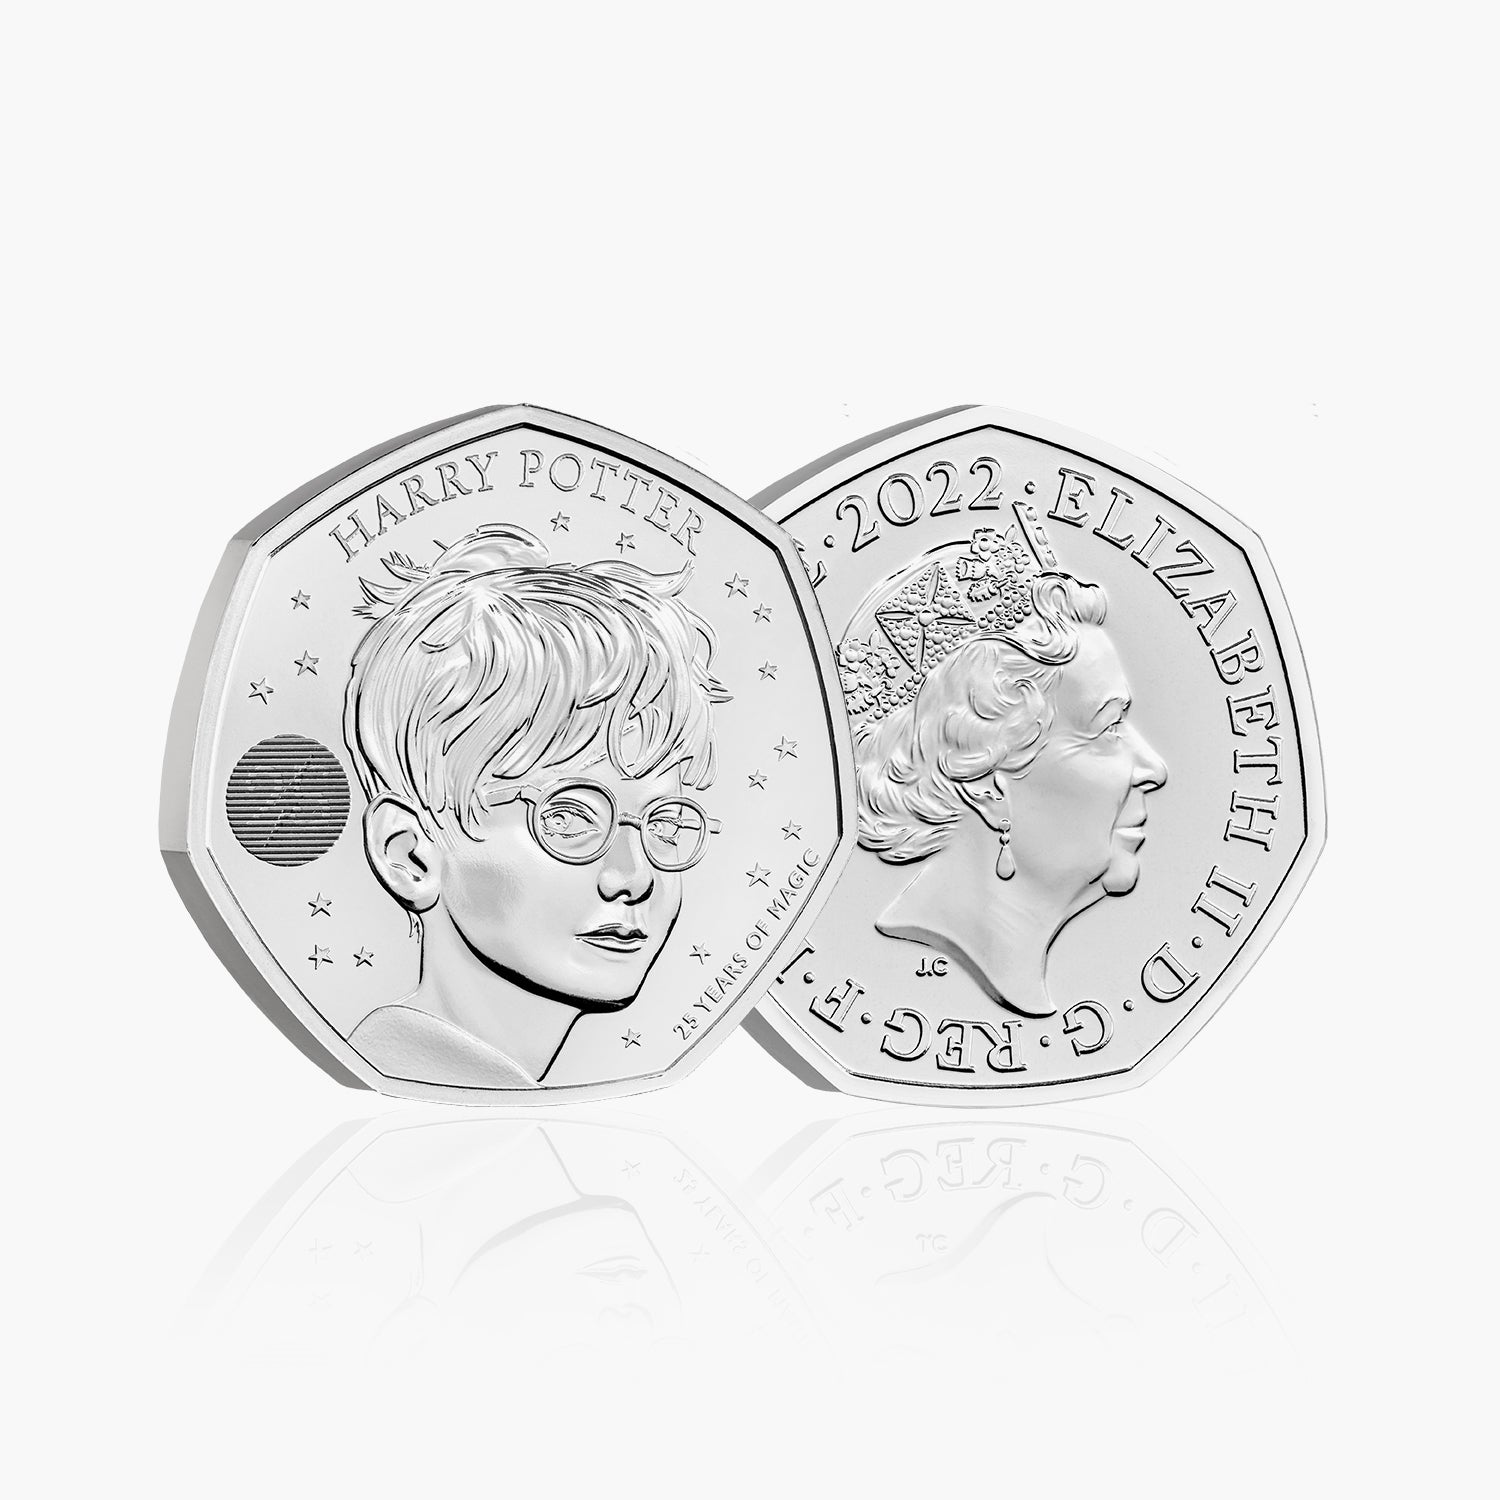 Harry Potter 2022 UK 50p Brilliant Uncirculated Coin